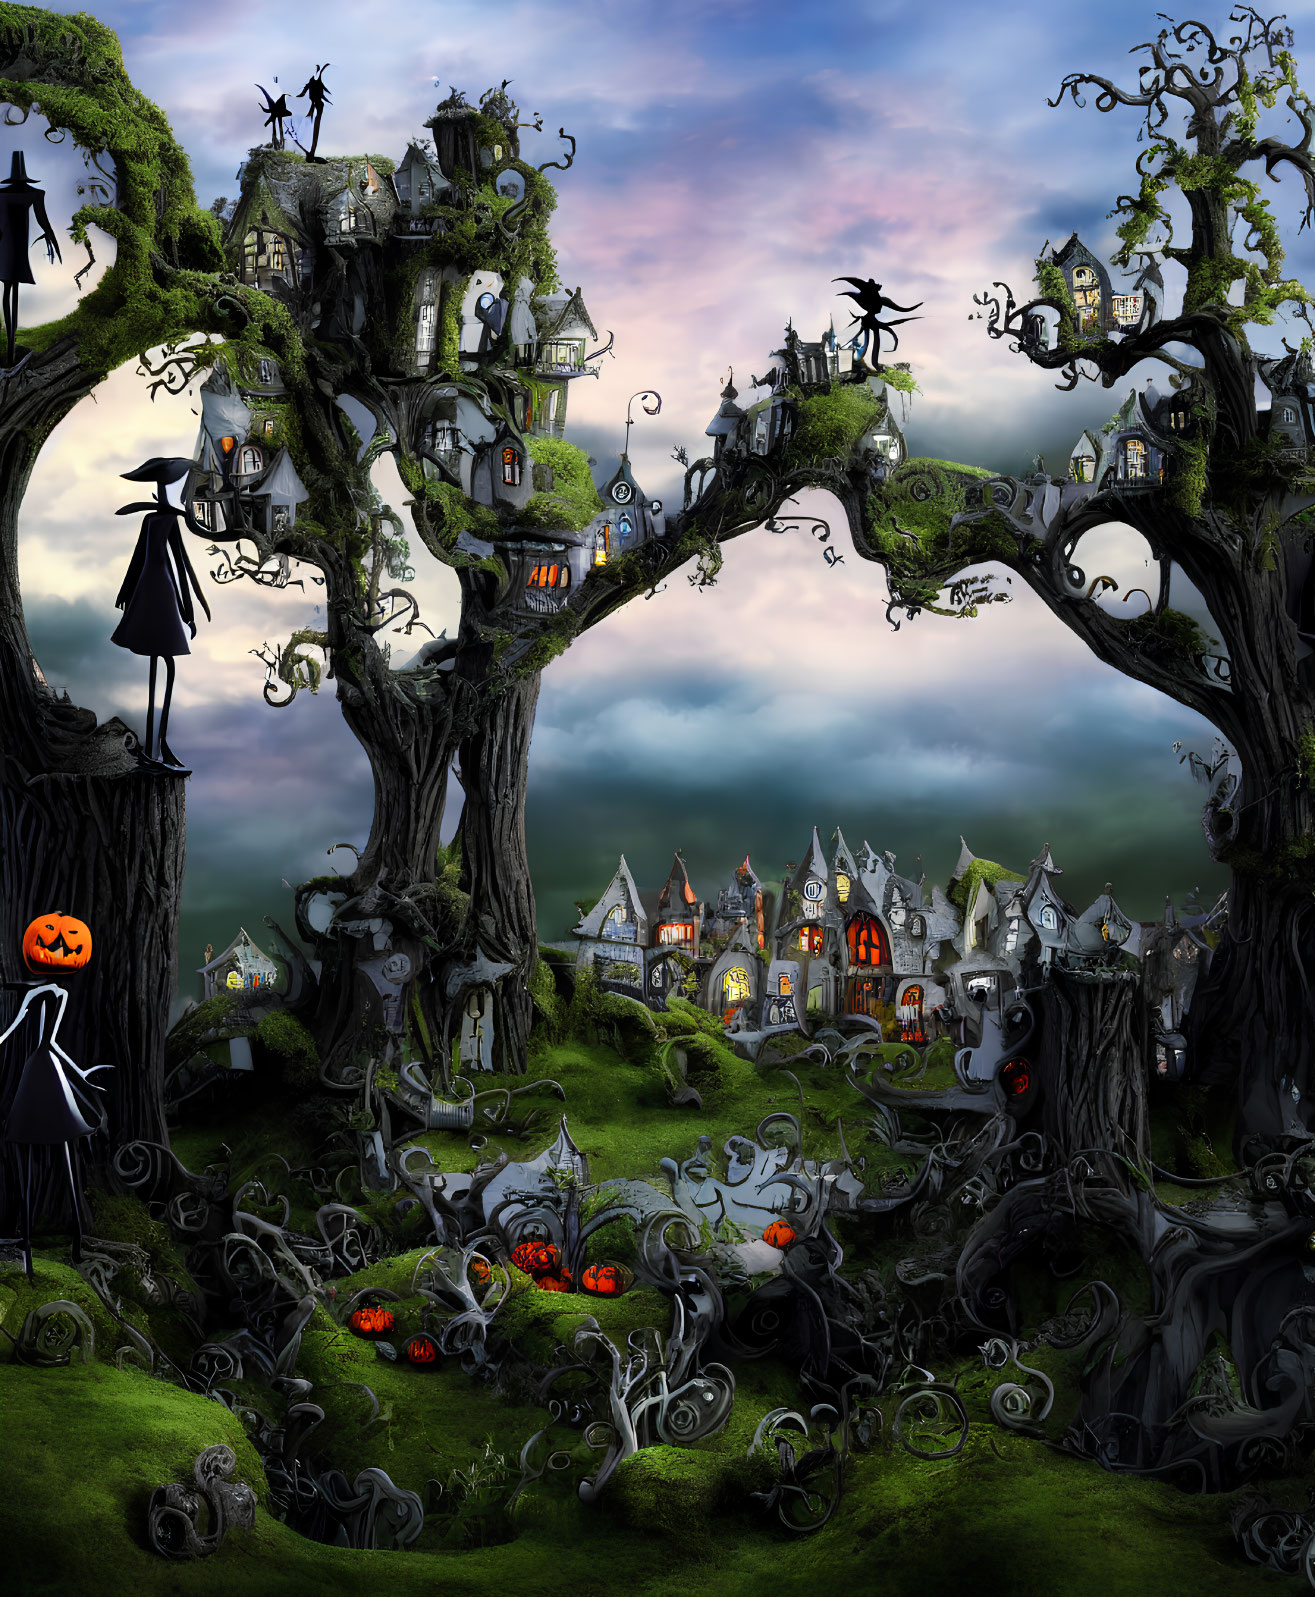 Whimsical Halloween-themed fantasy landscape with spooky elements